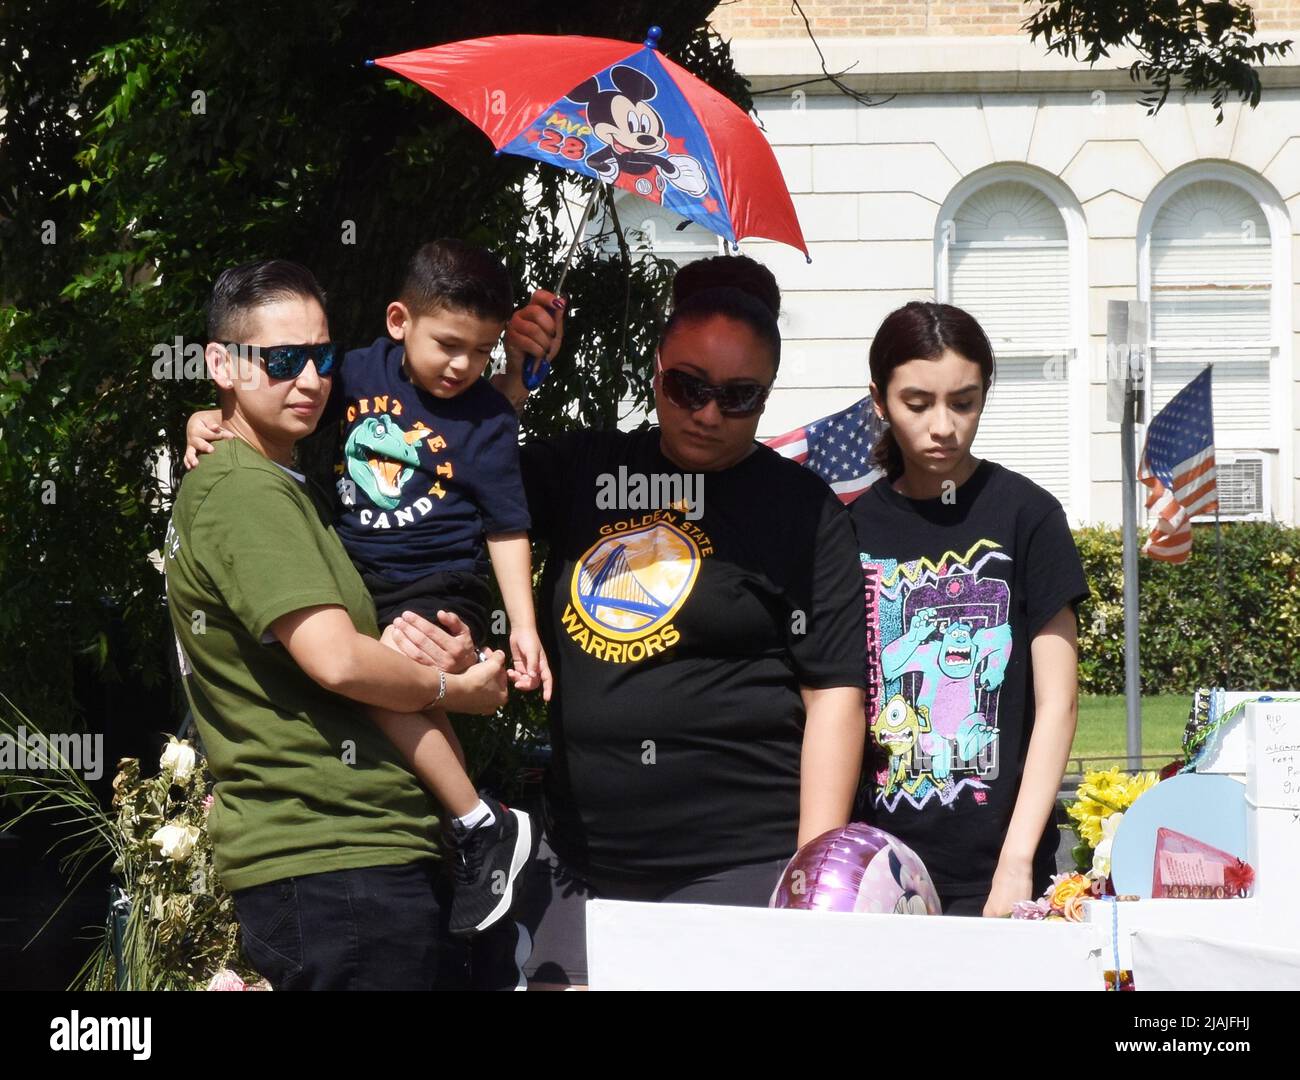 Uvalde, United States. 30th May, 2022. Mourners gather at a memorial of flowers at Robb Elementary School in Uvalde, Texas on Monday, May 30, 2022. A mass shooting days before left 19 children and two adults dead at the elementary school. Photo by Jon Farina/UPI Credit: UPI/Alamy Live News Stock Photo